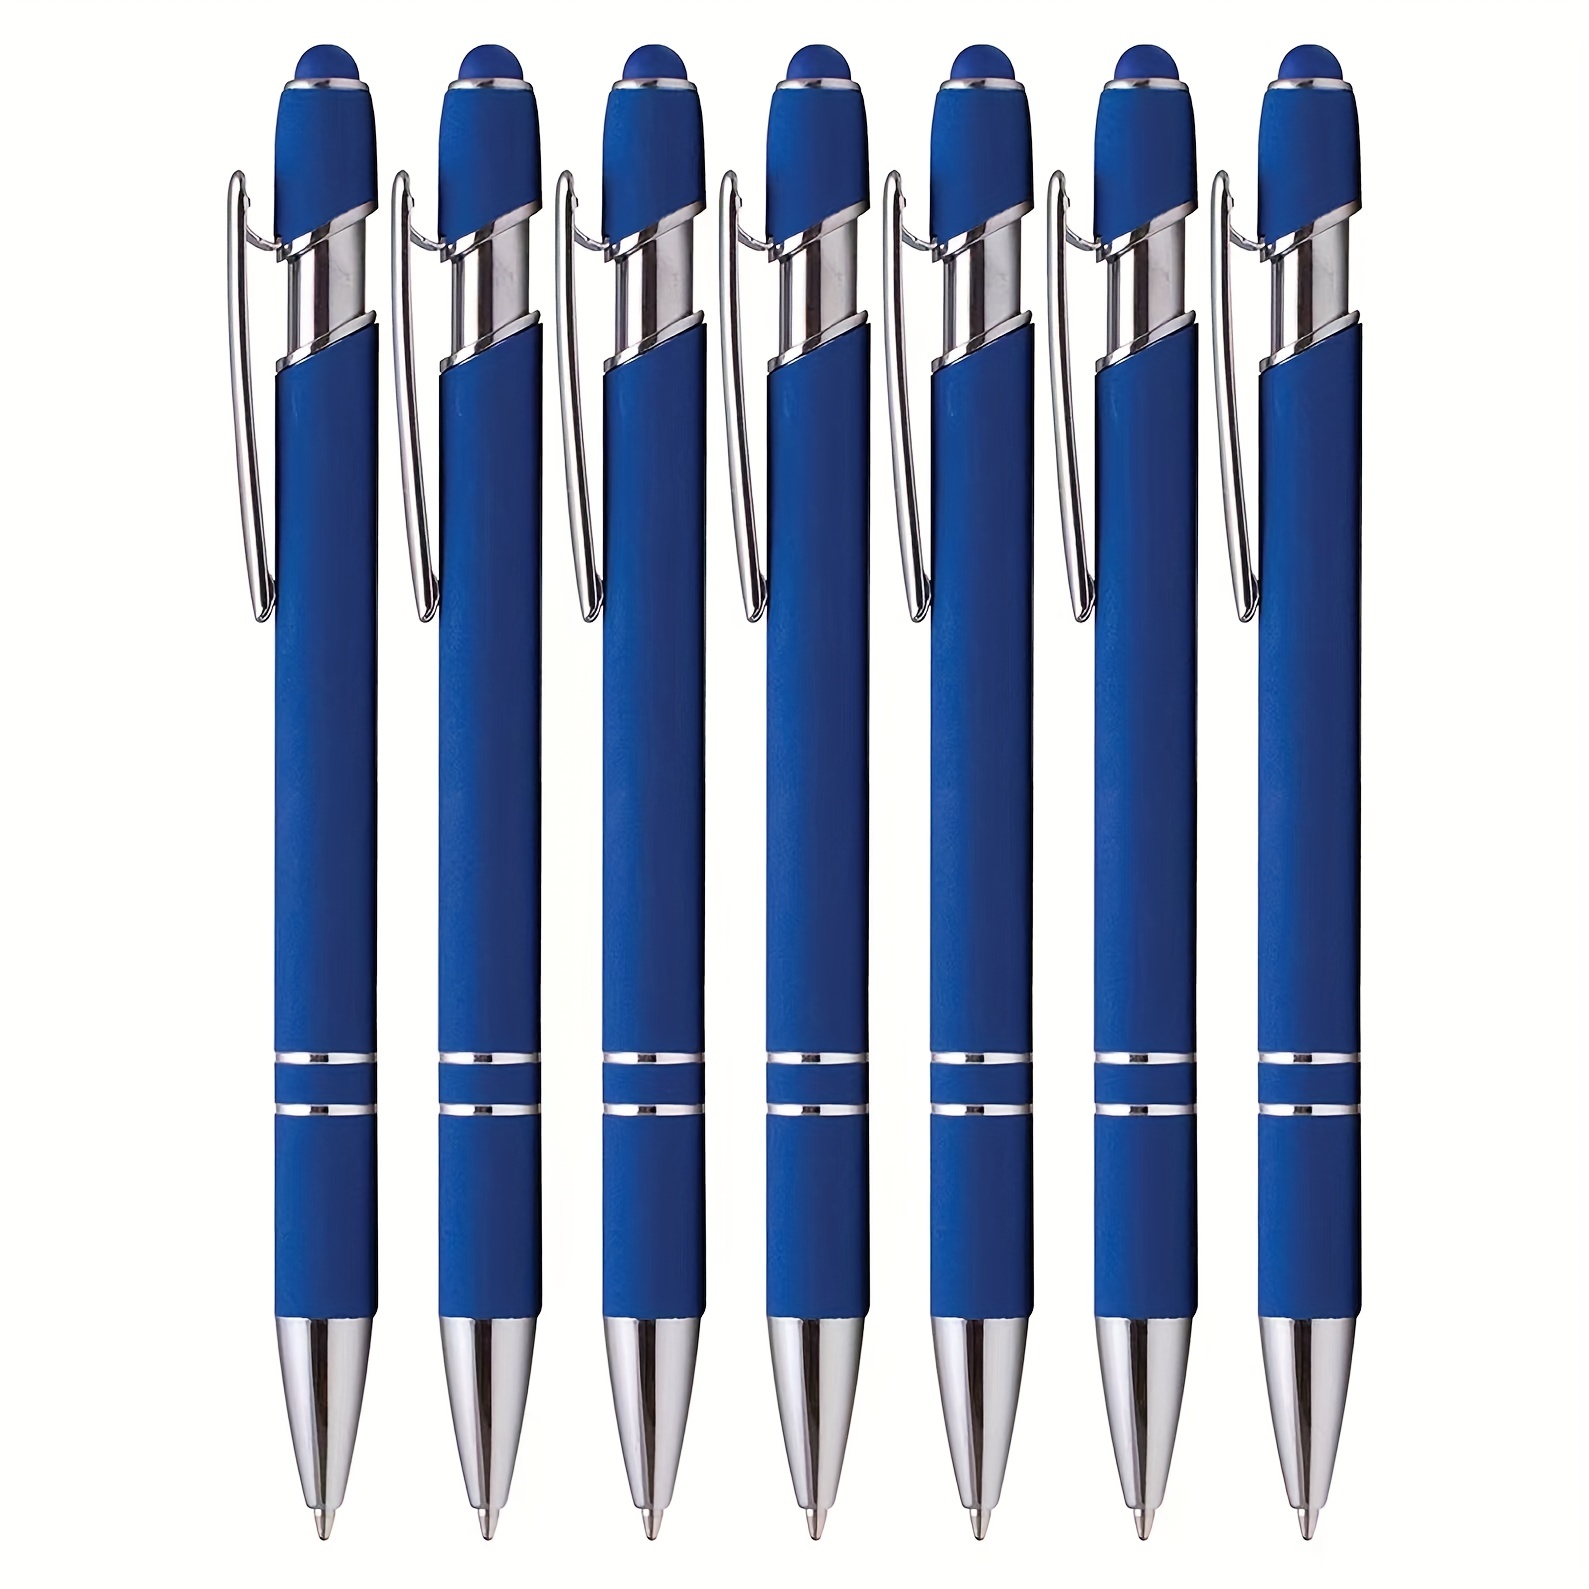 

7pcs Deep Blue Ballpoint Pens: 2-in-1 Metal Handwriting Pen With 1.0mm Medium Smooth Tip For Touch Screen Tablet Computers